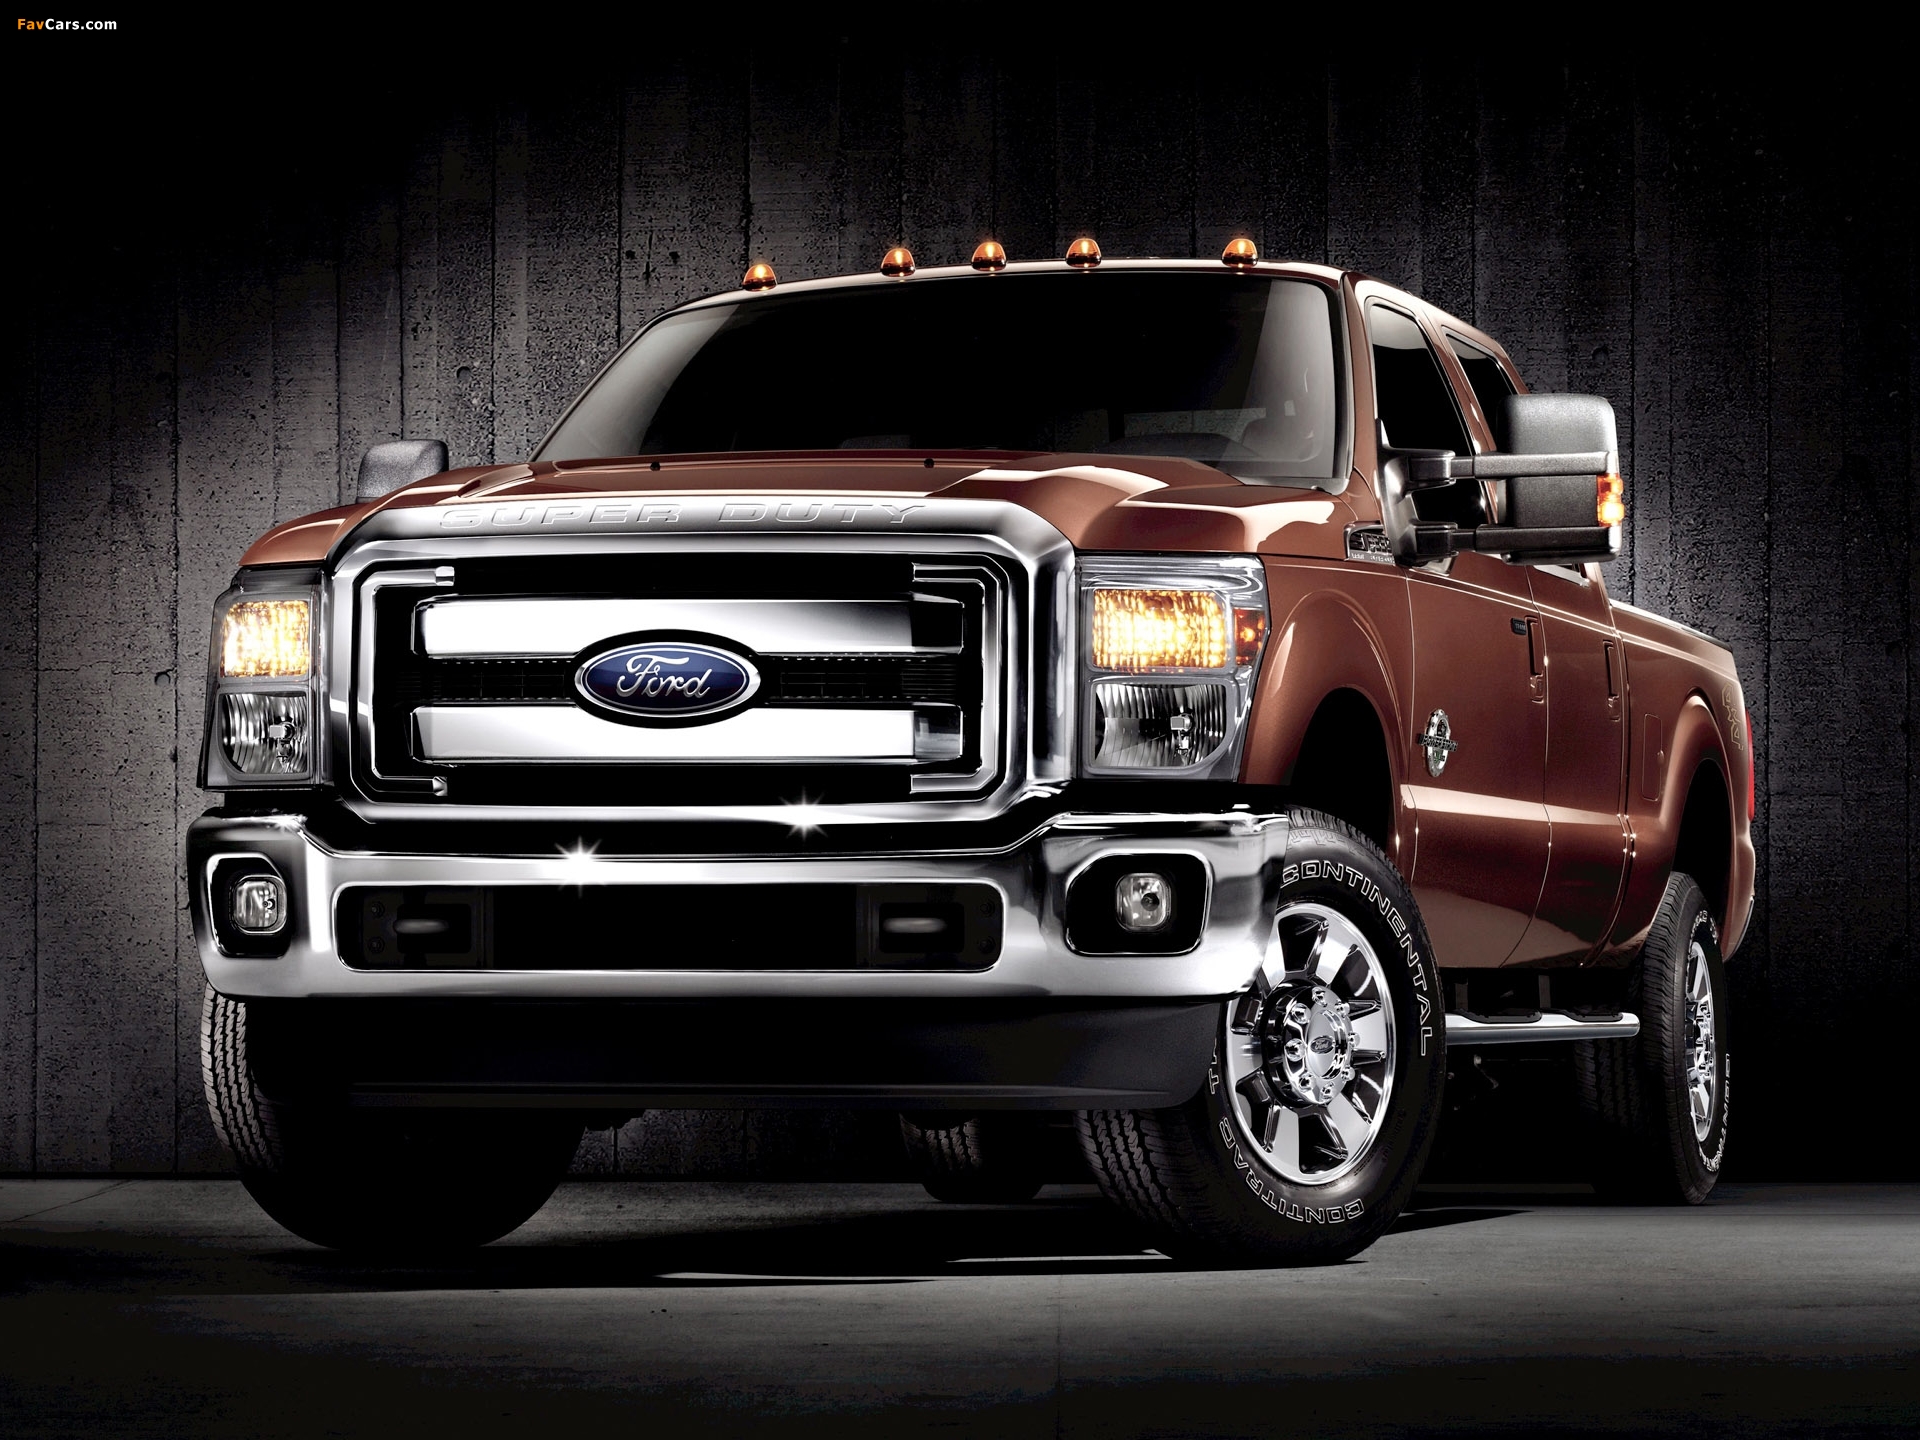 Ford F-350 Super Duty Crew Cab 2010 pictures (1920 x 1440)